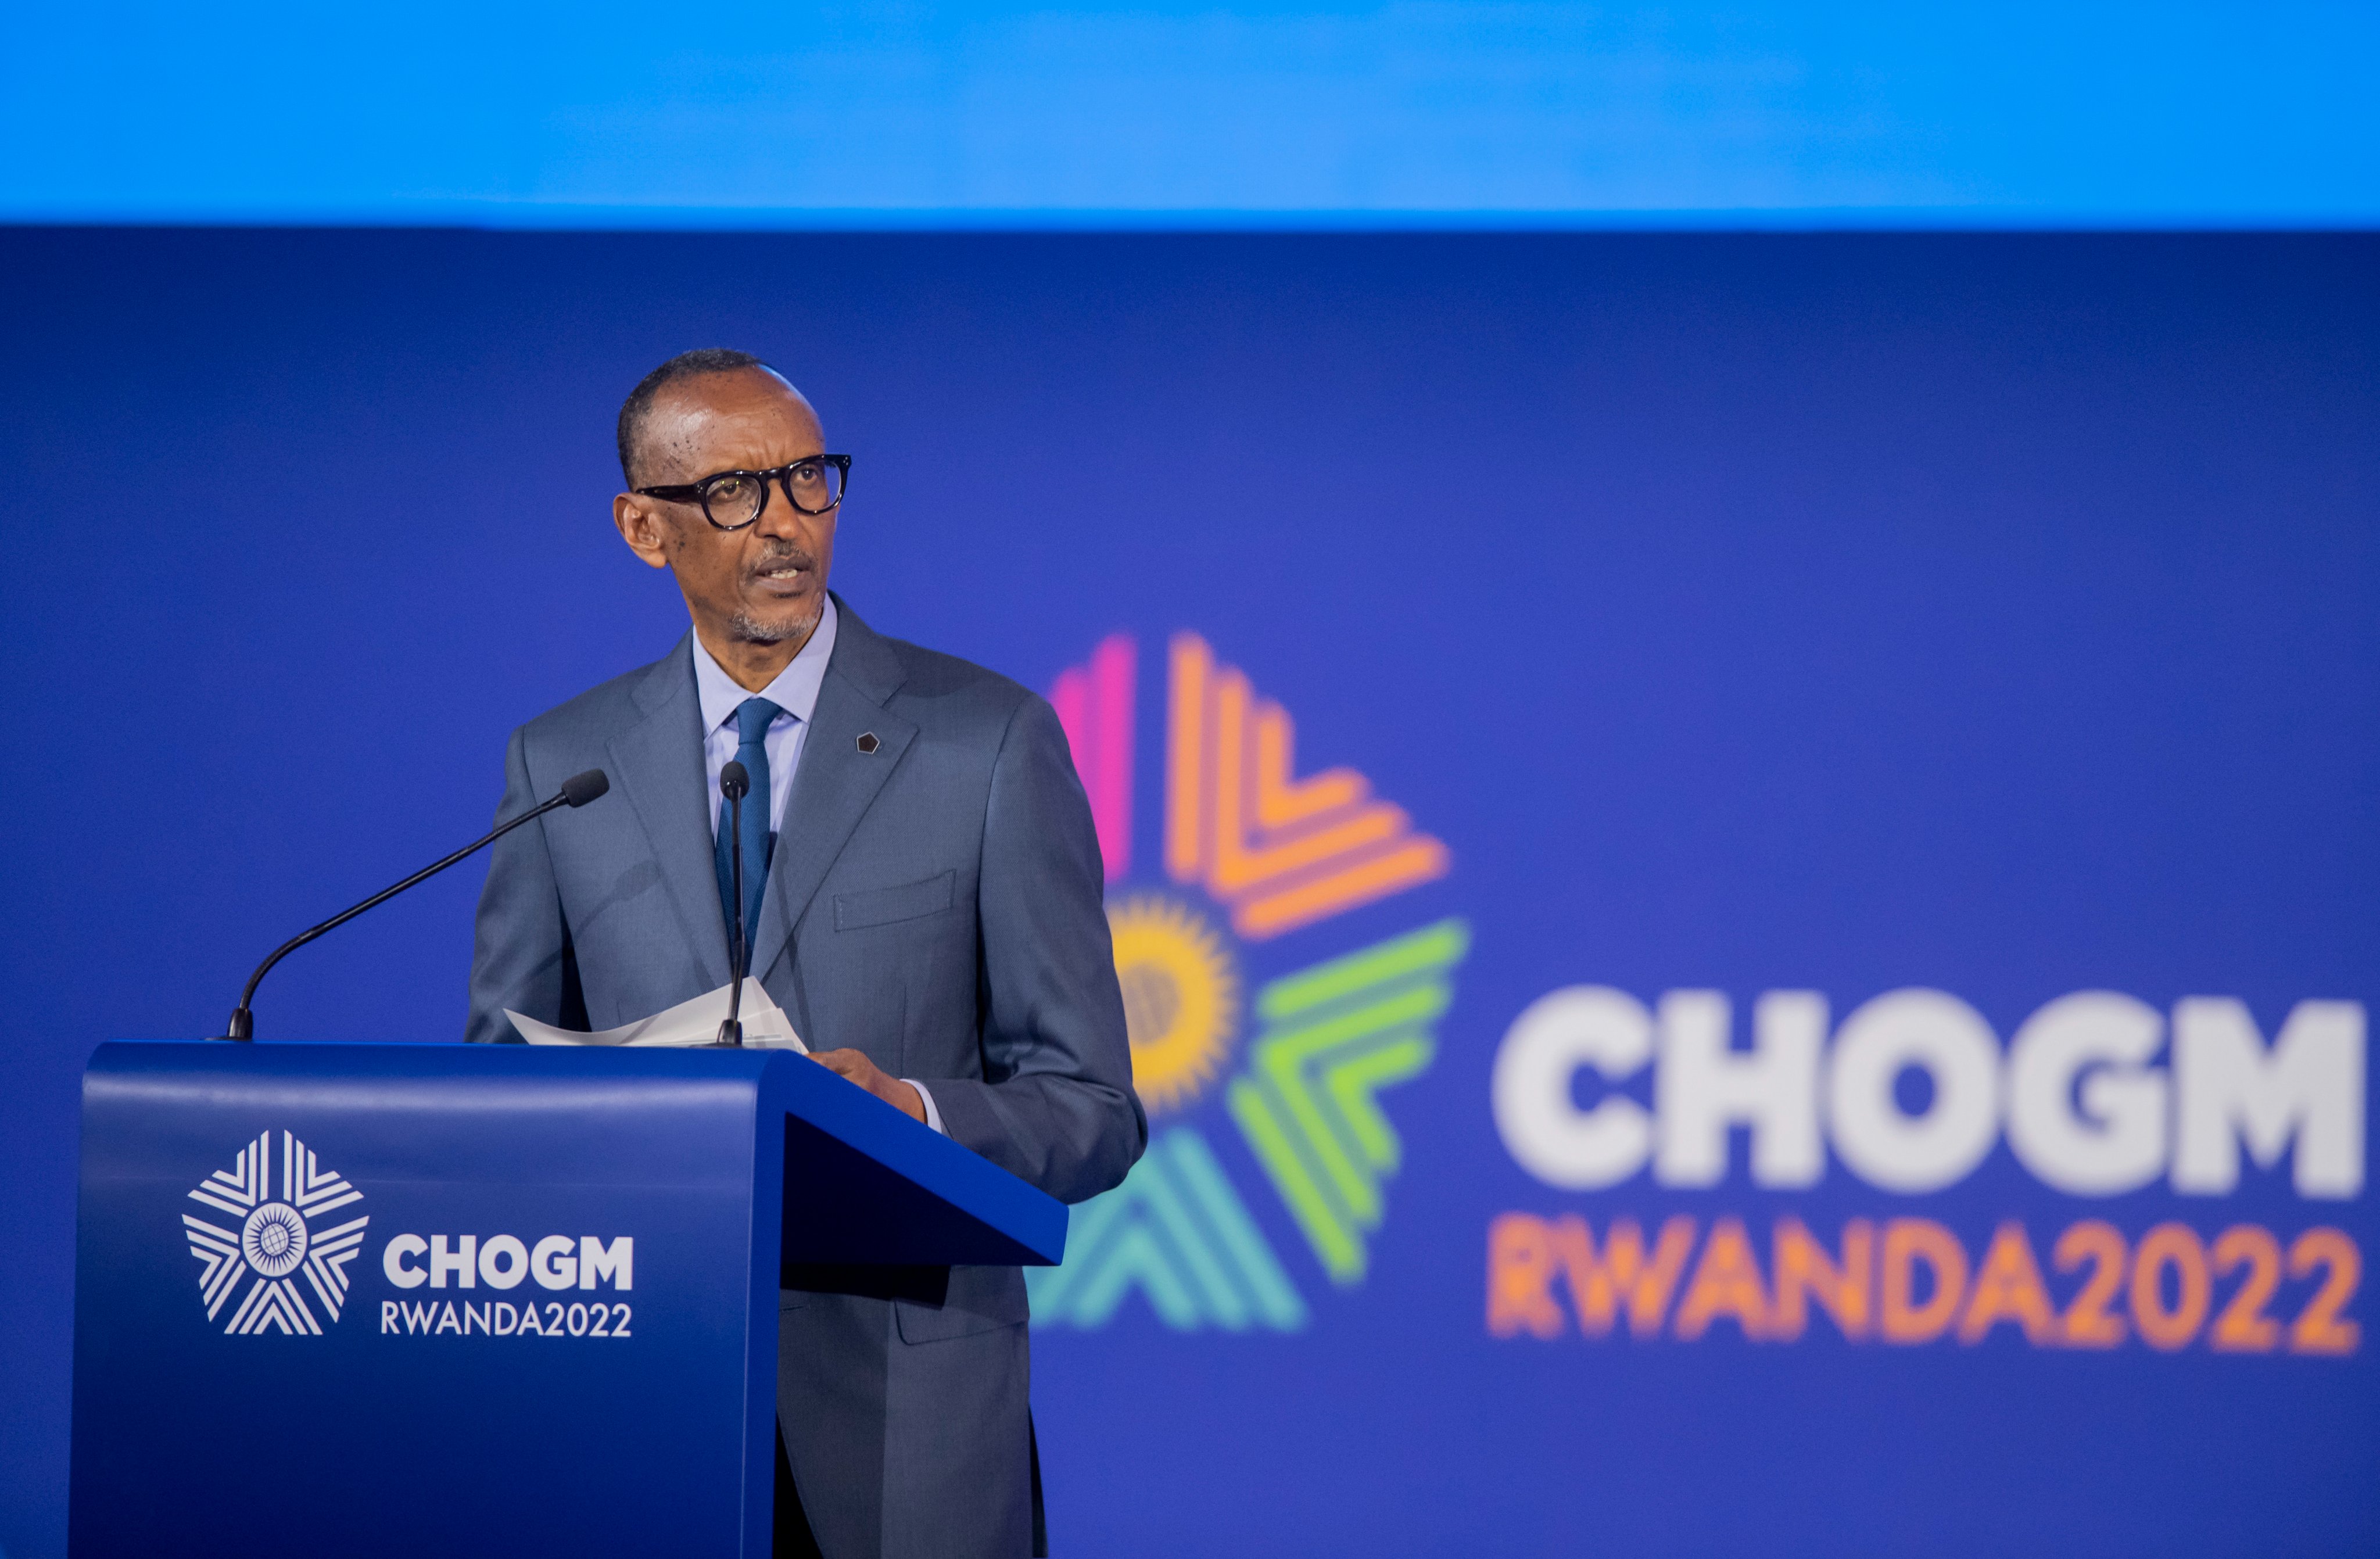 President Paul Kagame delivers remarks during the official opening of the 26th Commonwealth Heads of Government Meeting in Kigali on Friday, June 24. Photo by Village Urugwiro